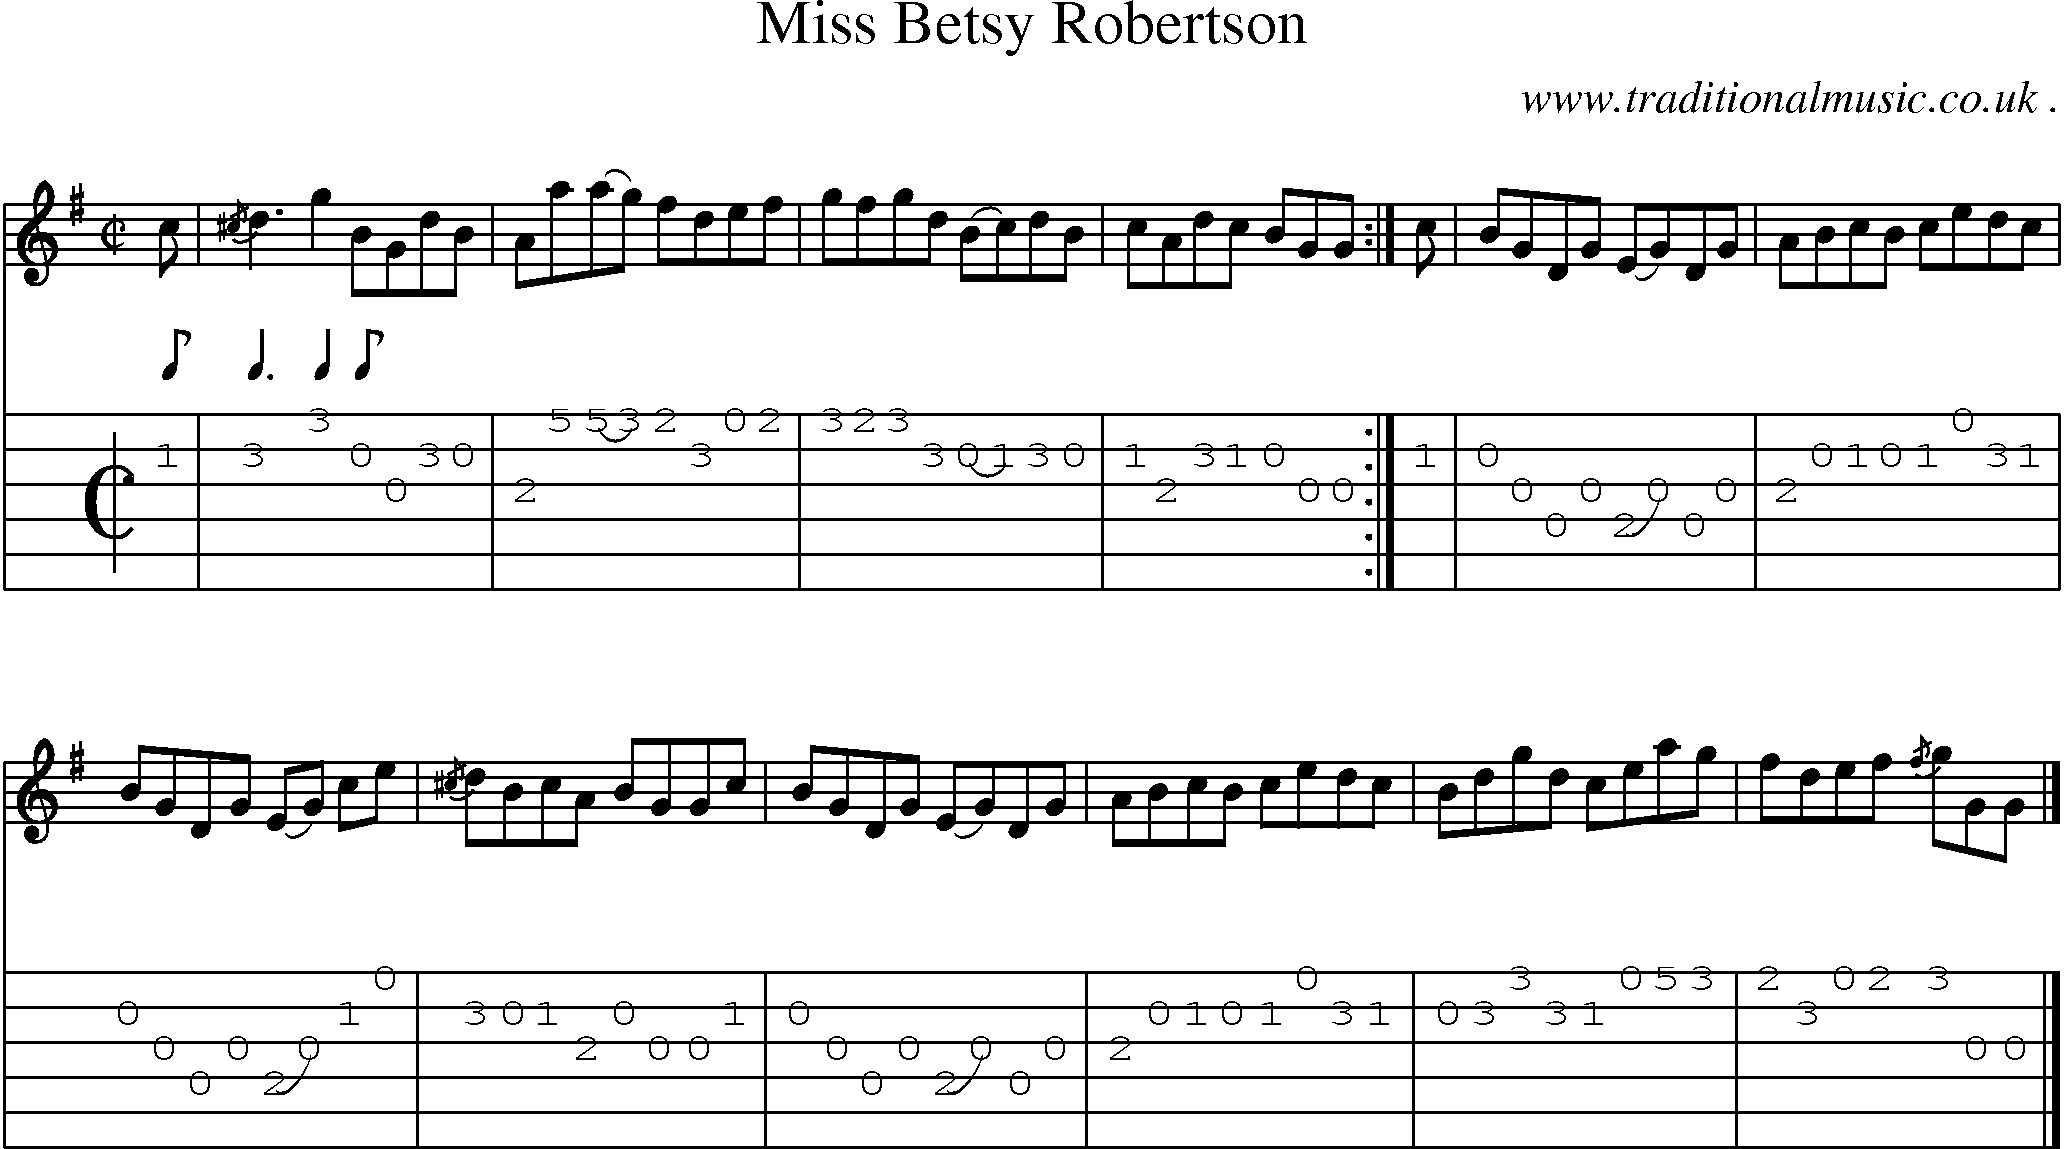 Sheet-music  score, Chords and Guitar Tabs for Miss Betsy Robertson